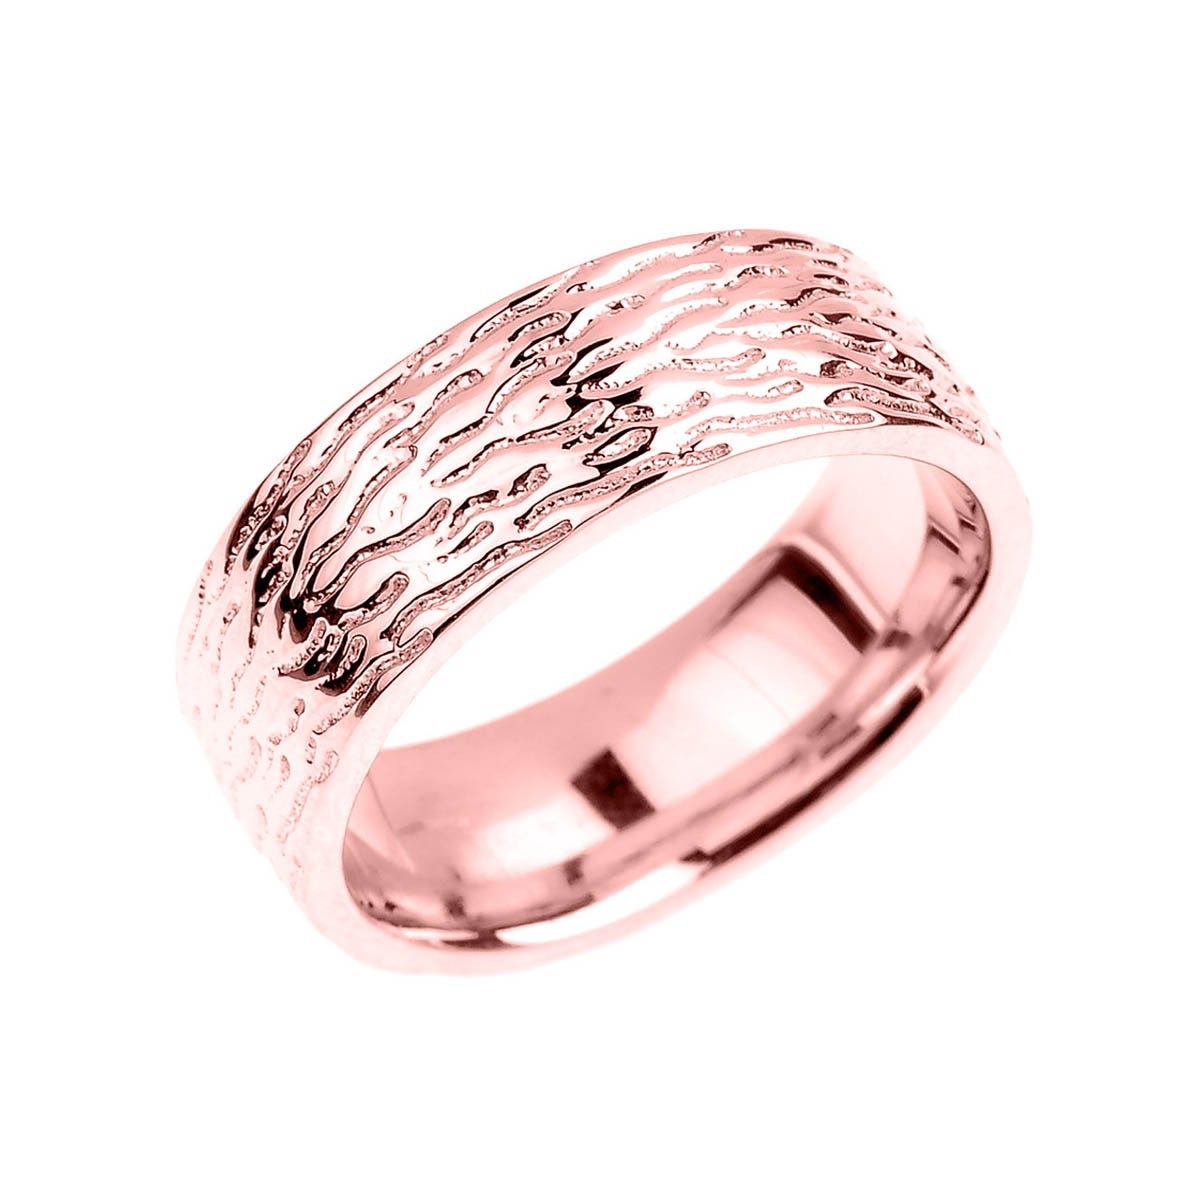 Mens Wedding Ring in Rose by Gold Boutique GOOFASH